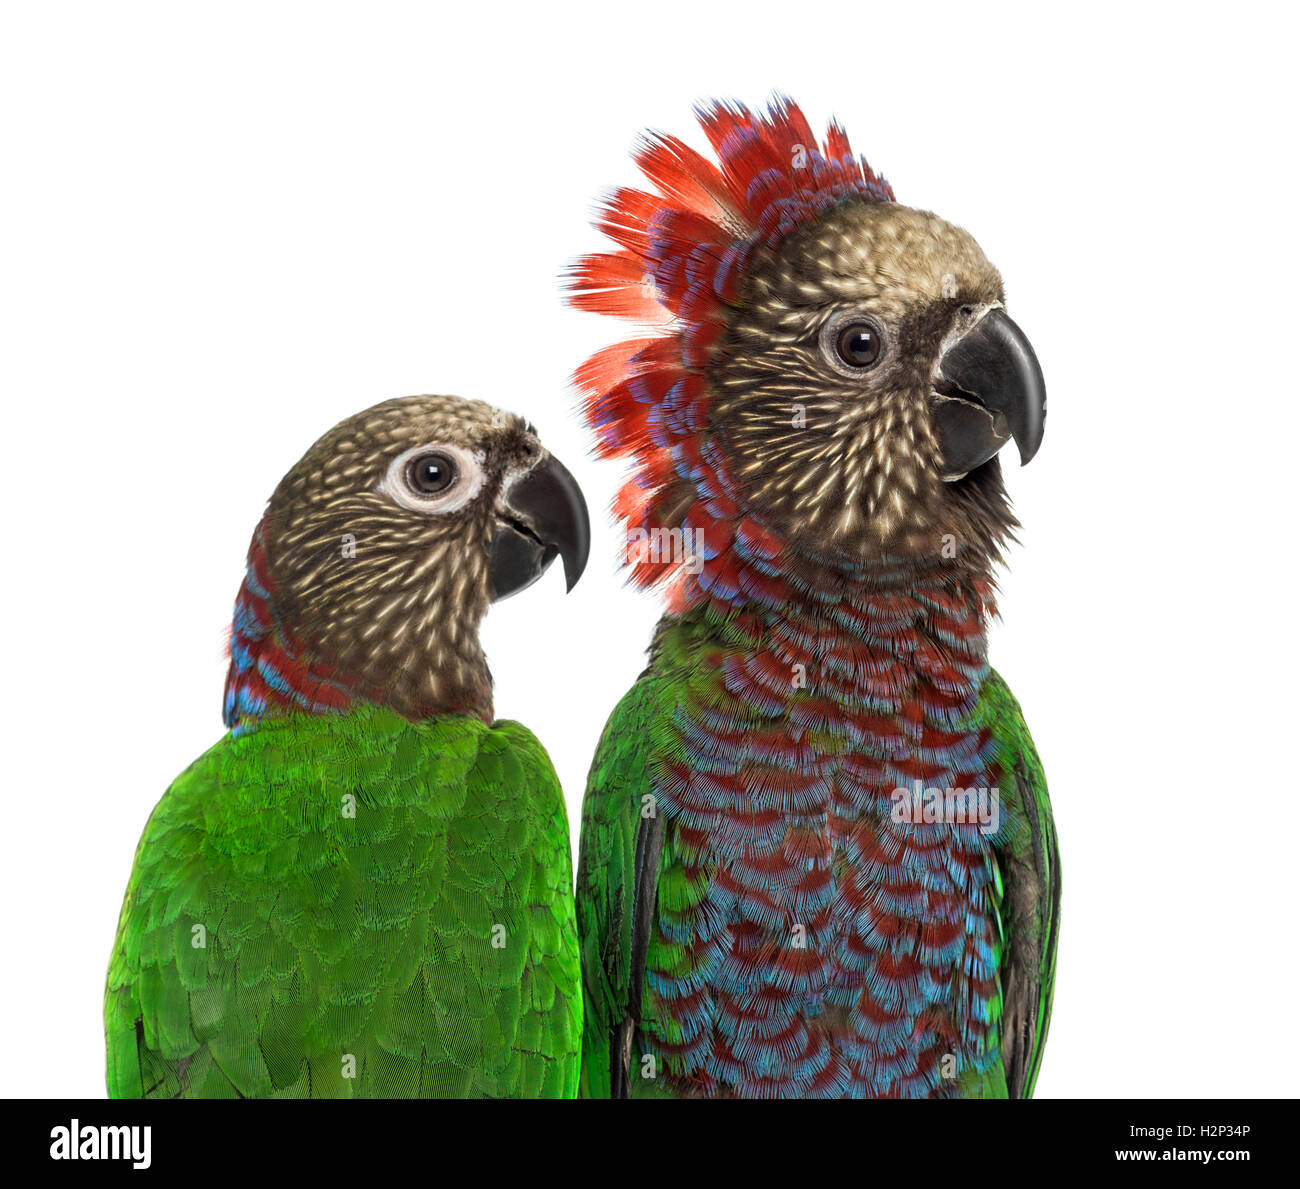 Close-up of a couple of Red-fan parrot Deroptyus accipitrinus, isolated on white Banque D'Images